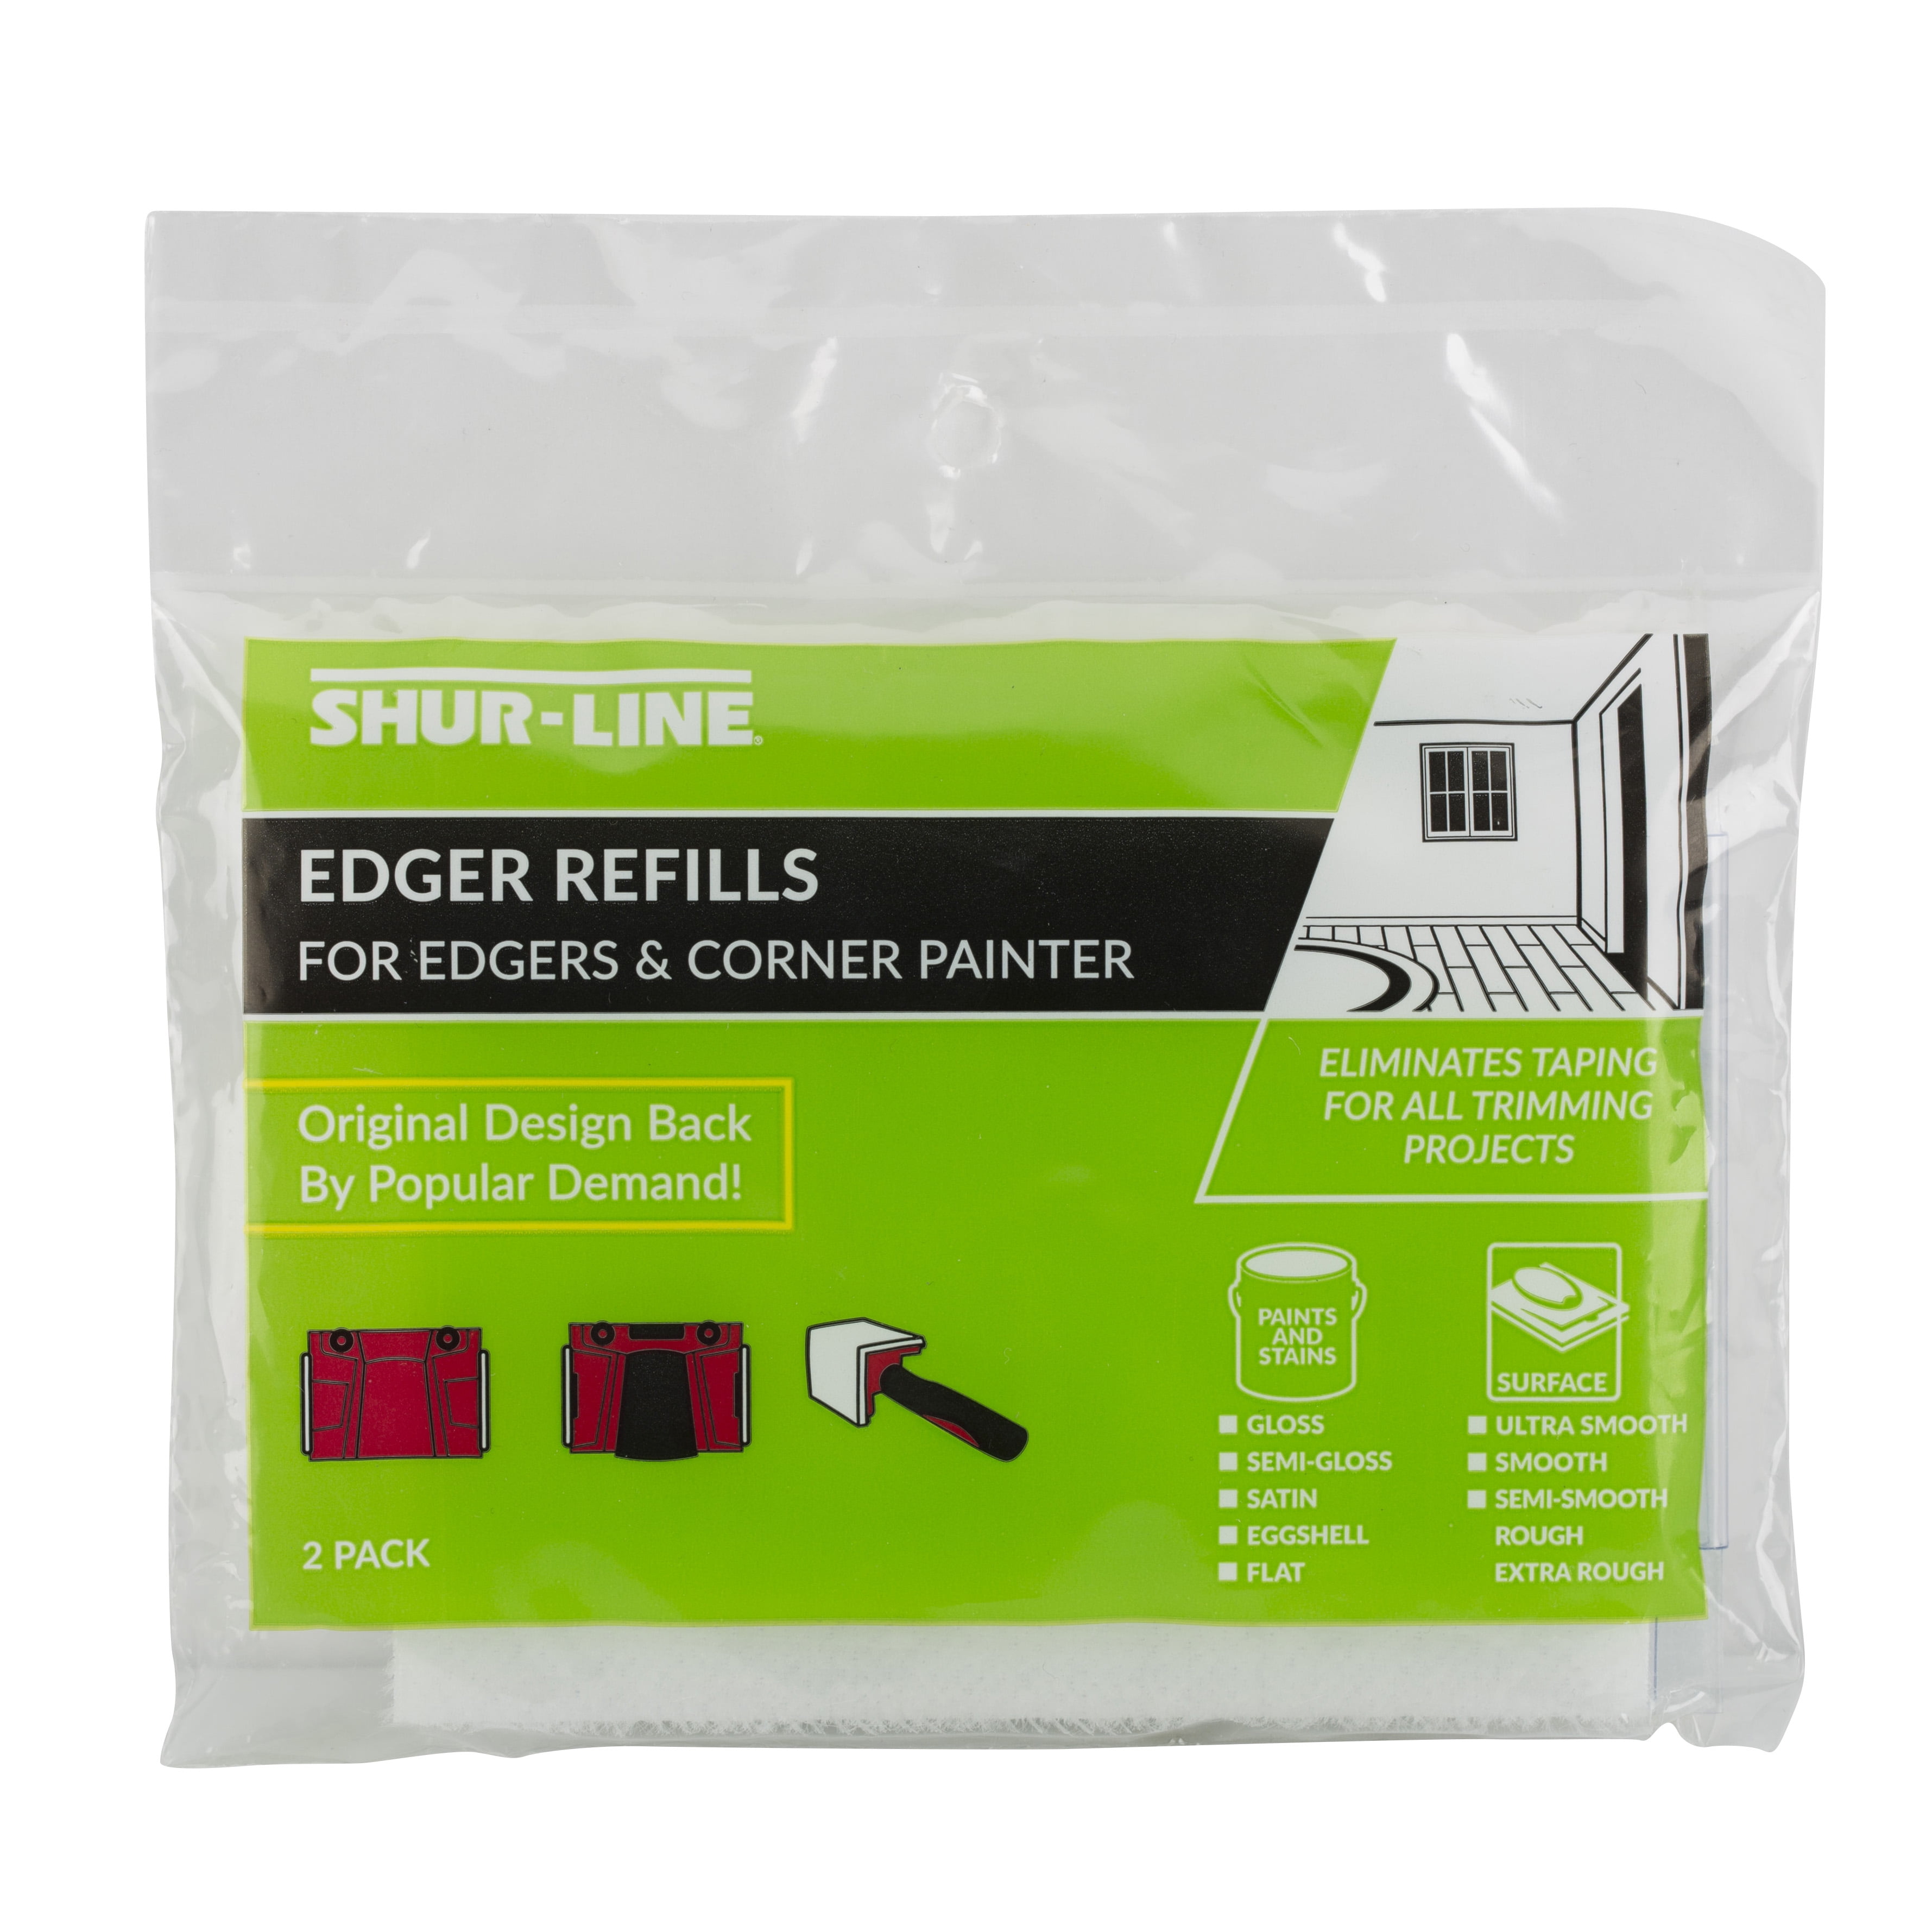 Shur-Line Paint Edger with Easy Release and Bonus Knit Pad